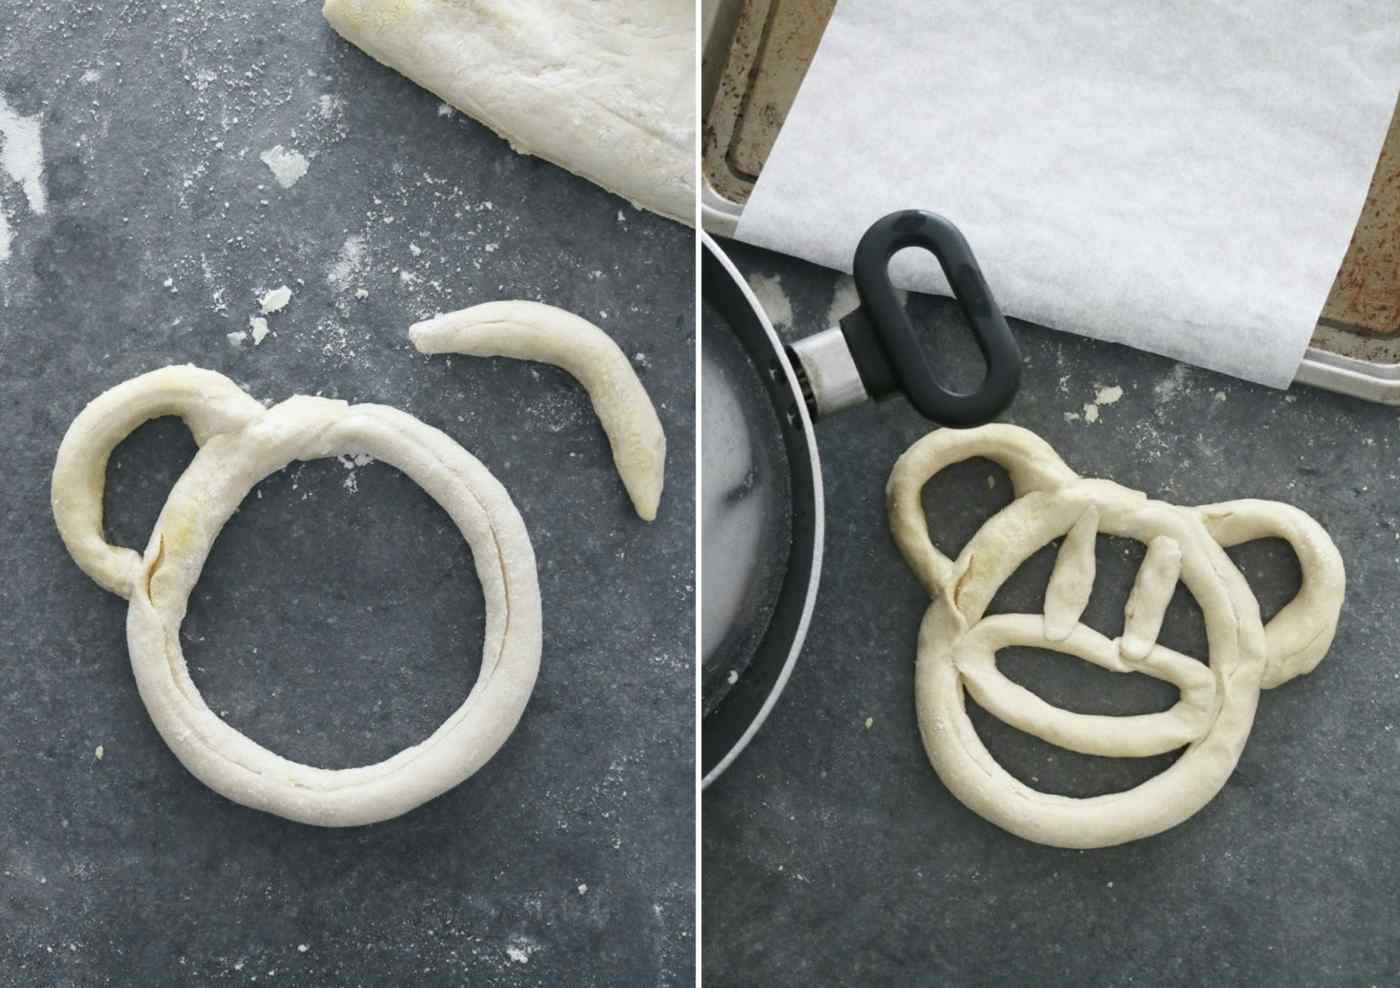 Instructions for Mickey and Minnie Maus from homemade dough